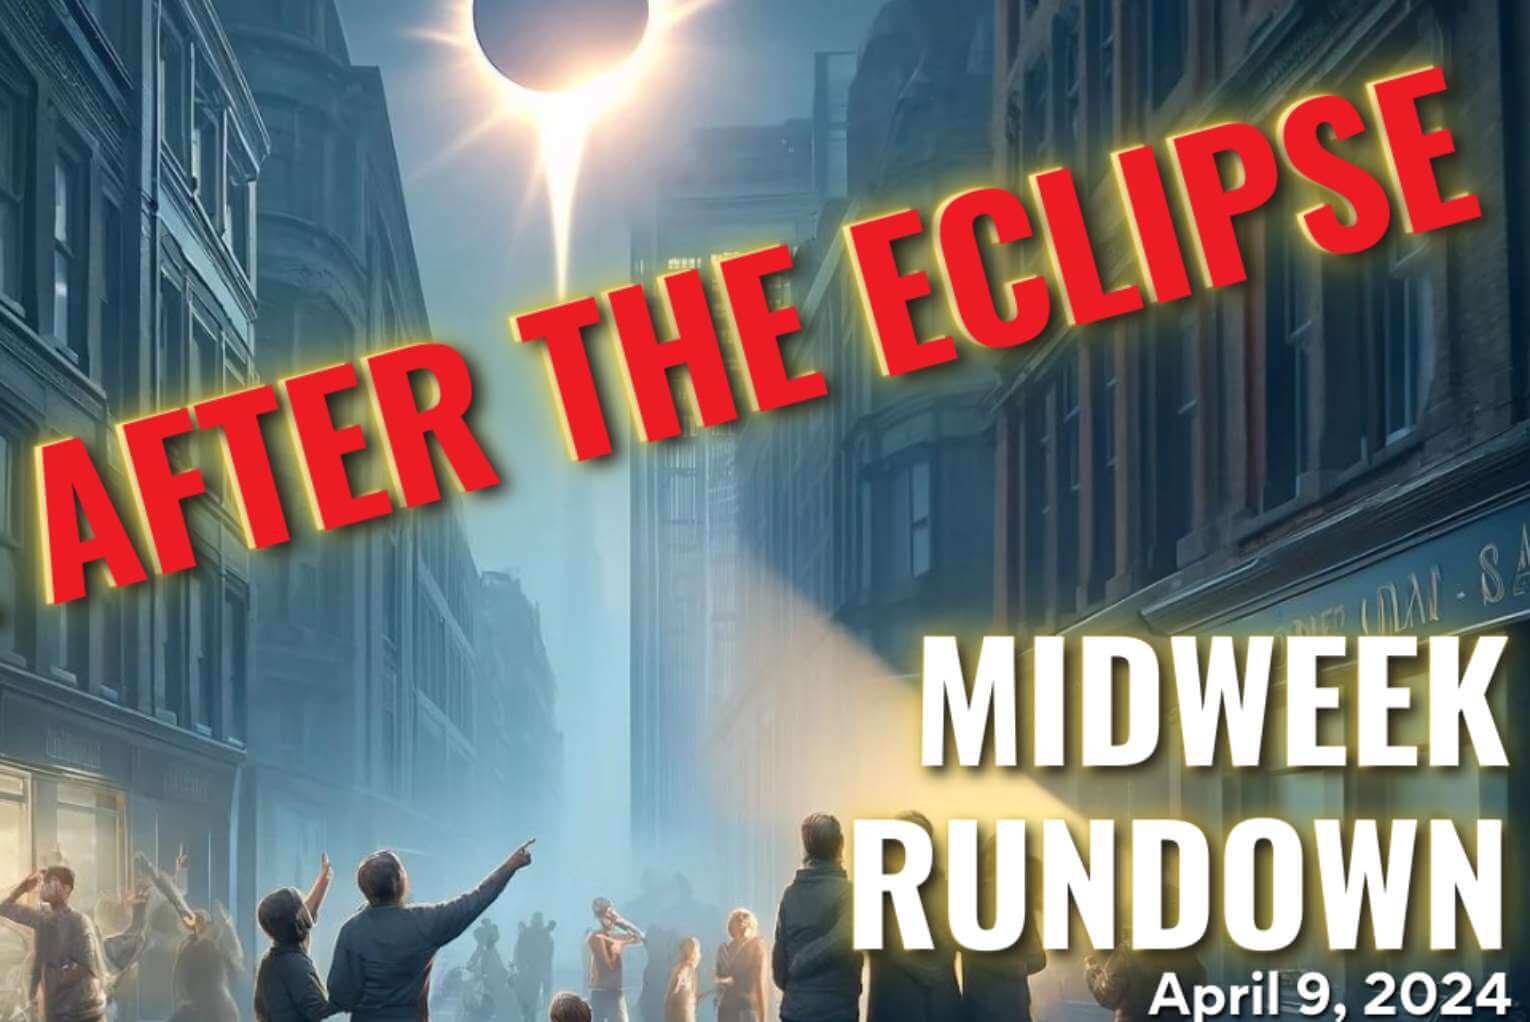 Morning Rundown: The Eclipse: Is This America’s ‘Nineveh Moment’?